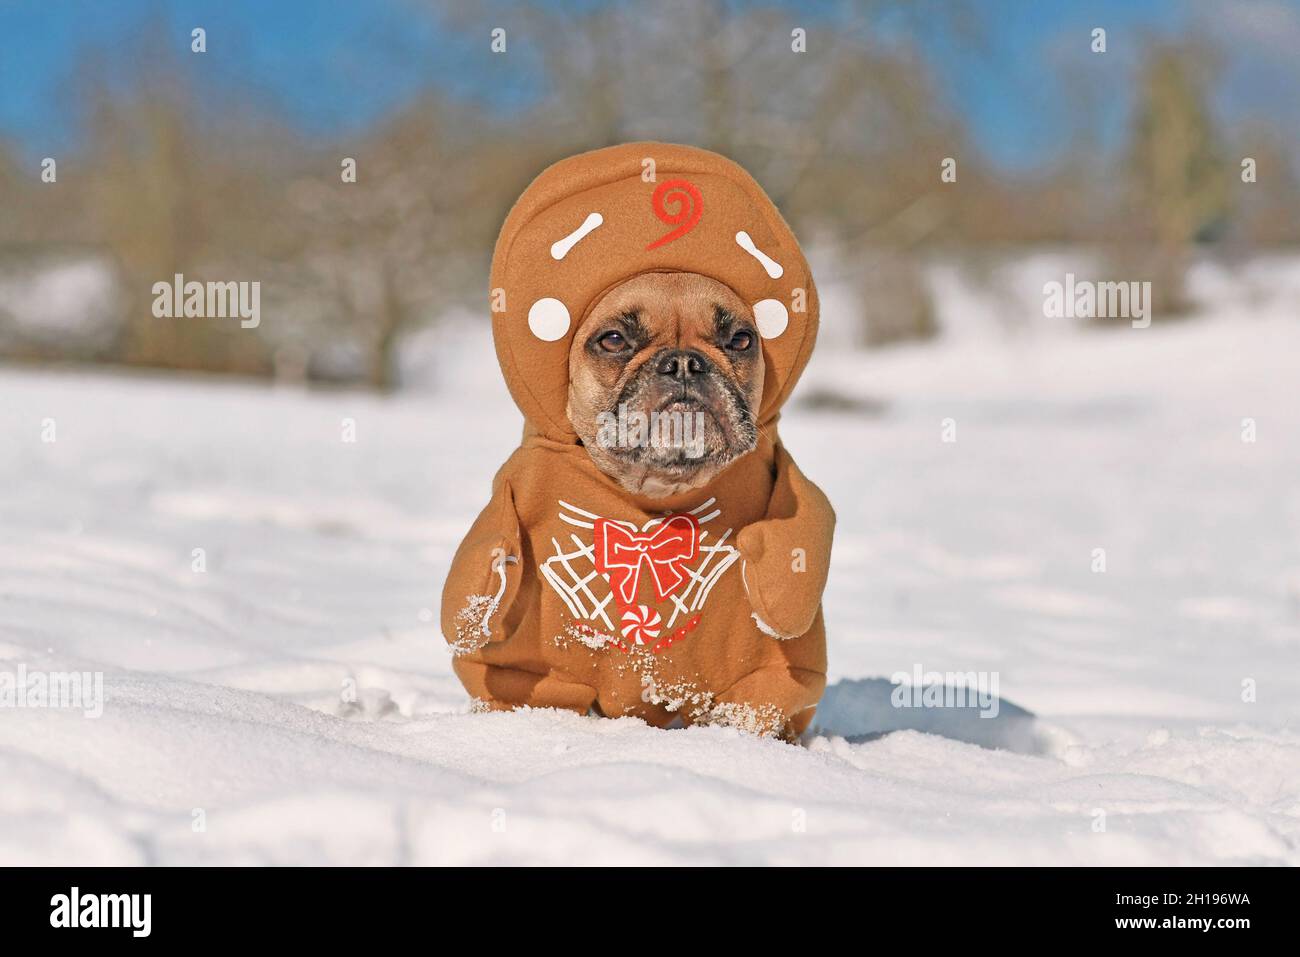 Funny Crazy Dog Rages On Snow Stock Photo 1243032625